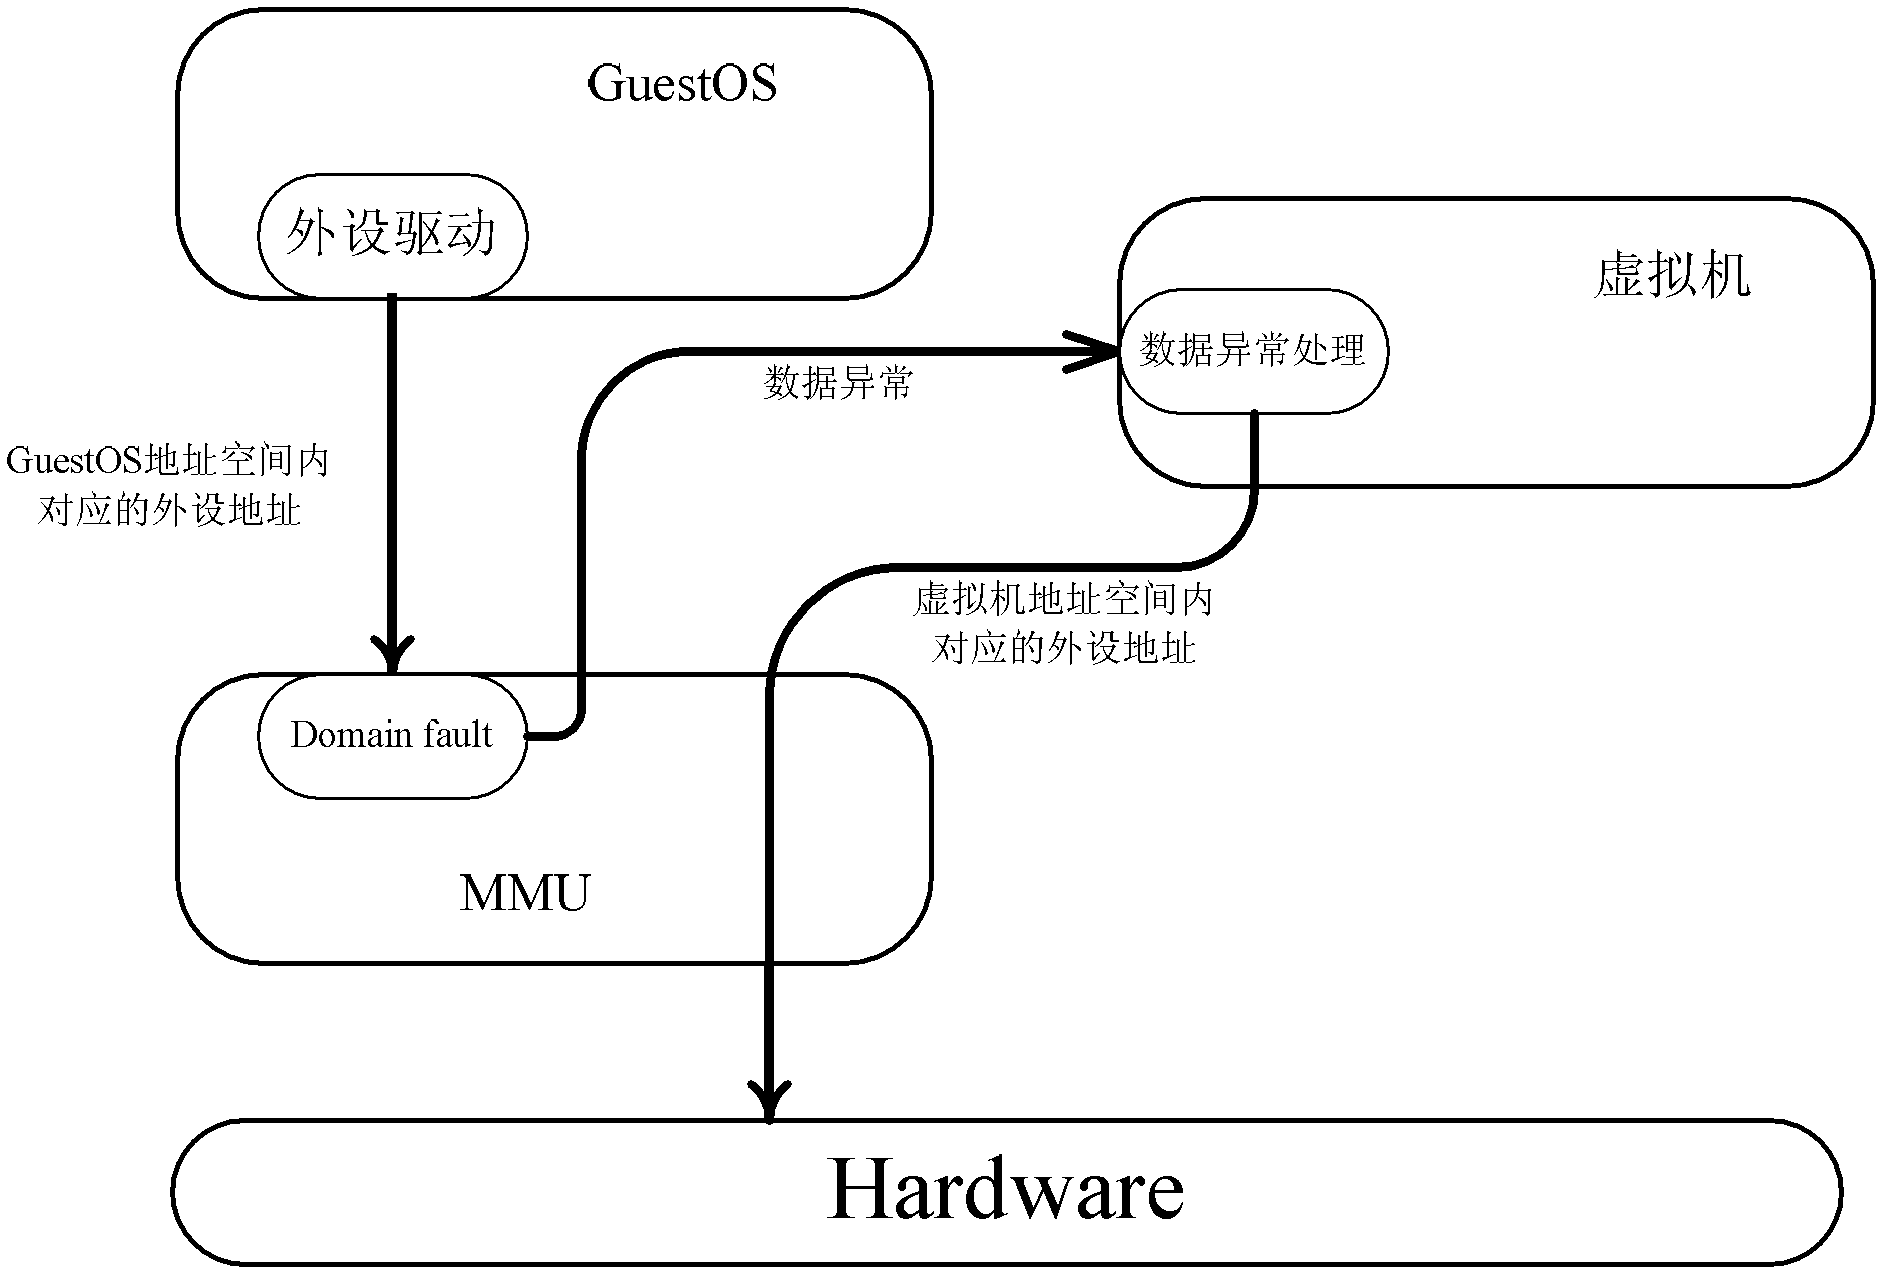 Method for realizing peripheral access control based on MMU (memory management unit) in ARM virtual machine